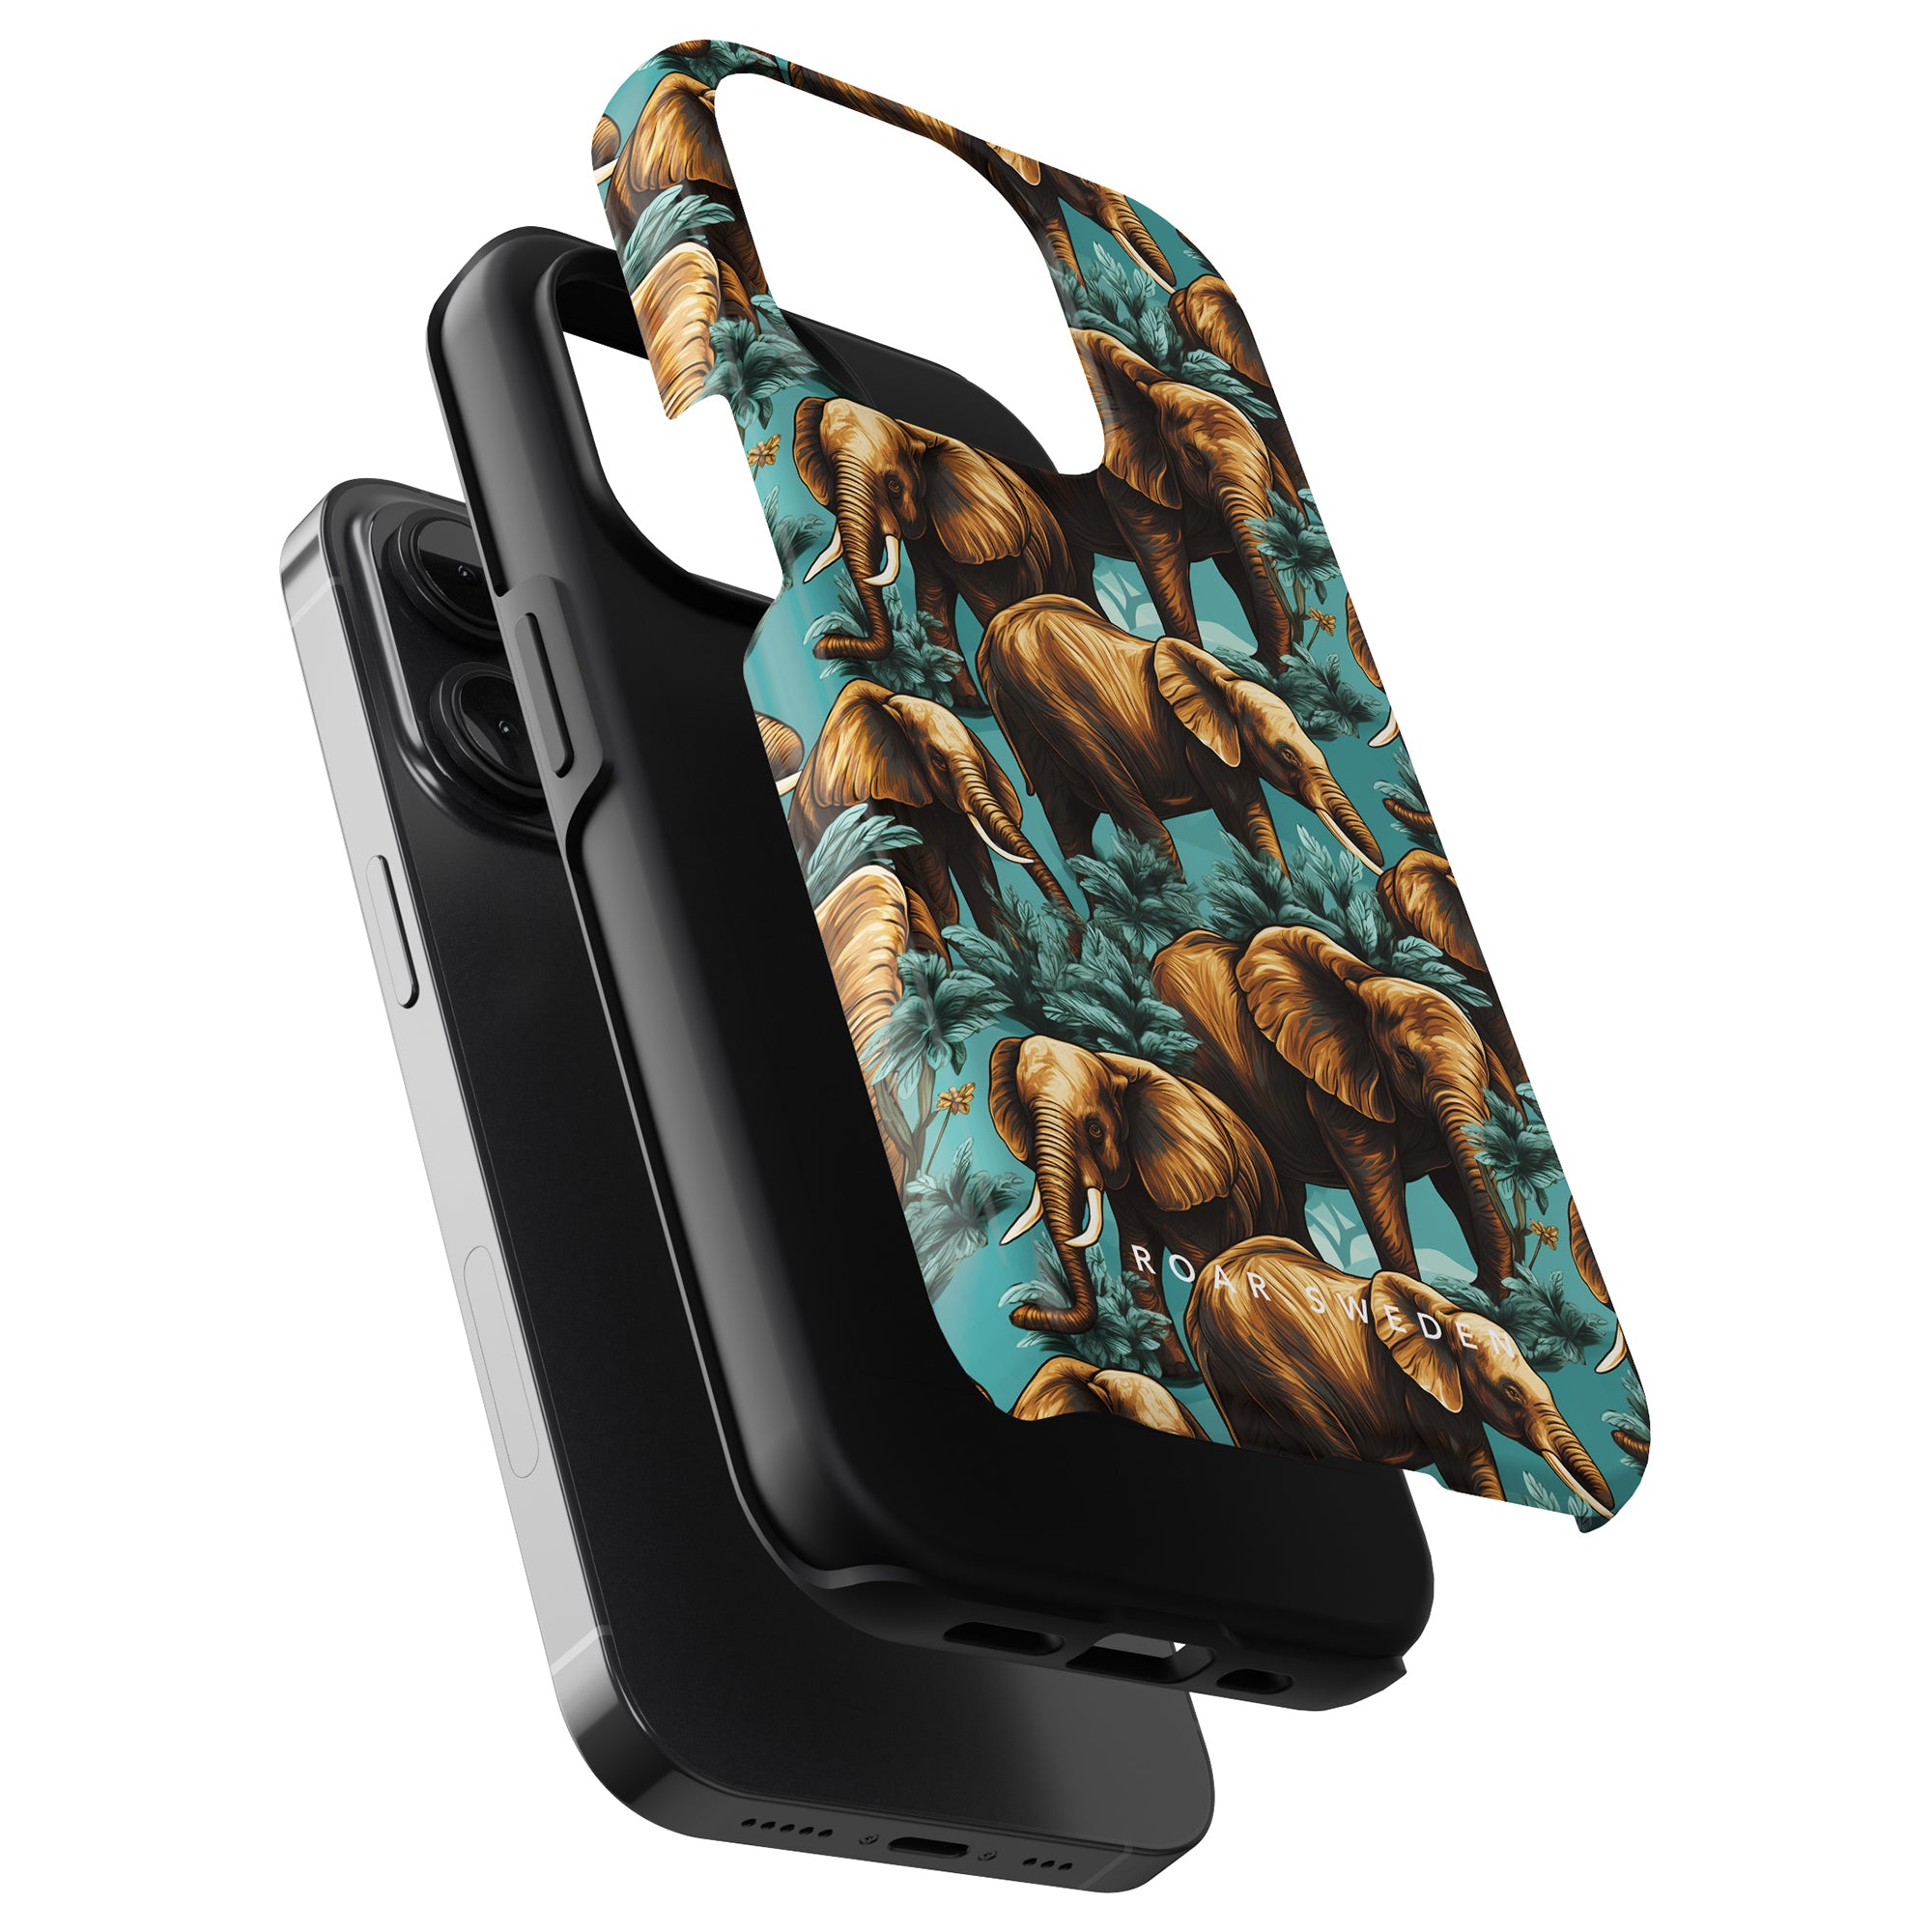 Three smartphone cases are shown, one with a black design, one dark gray, and one from the Hathi - Tough Case featuring a colorful print of elephants and tropical foliage. The cases are stacked and displayed at an angle.